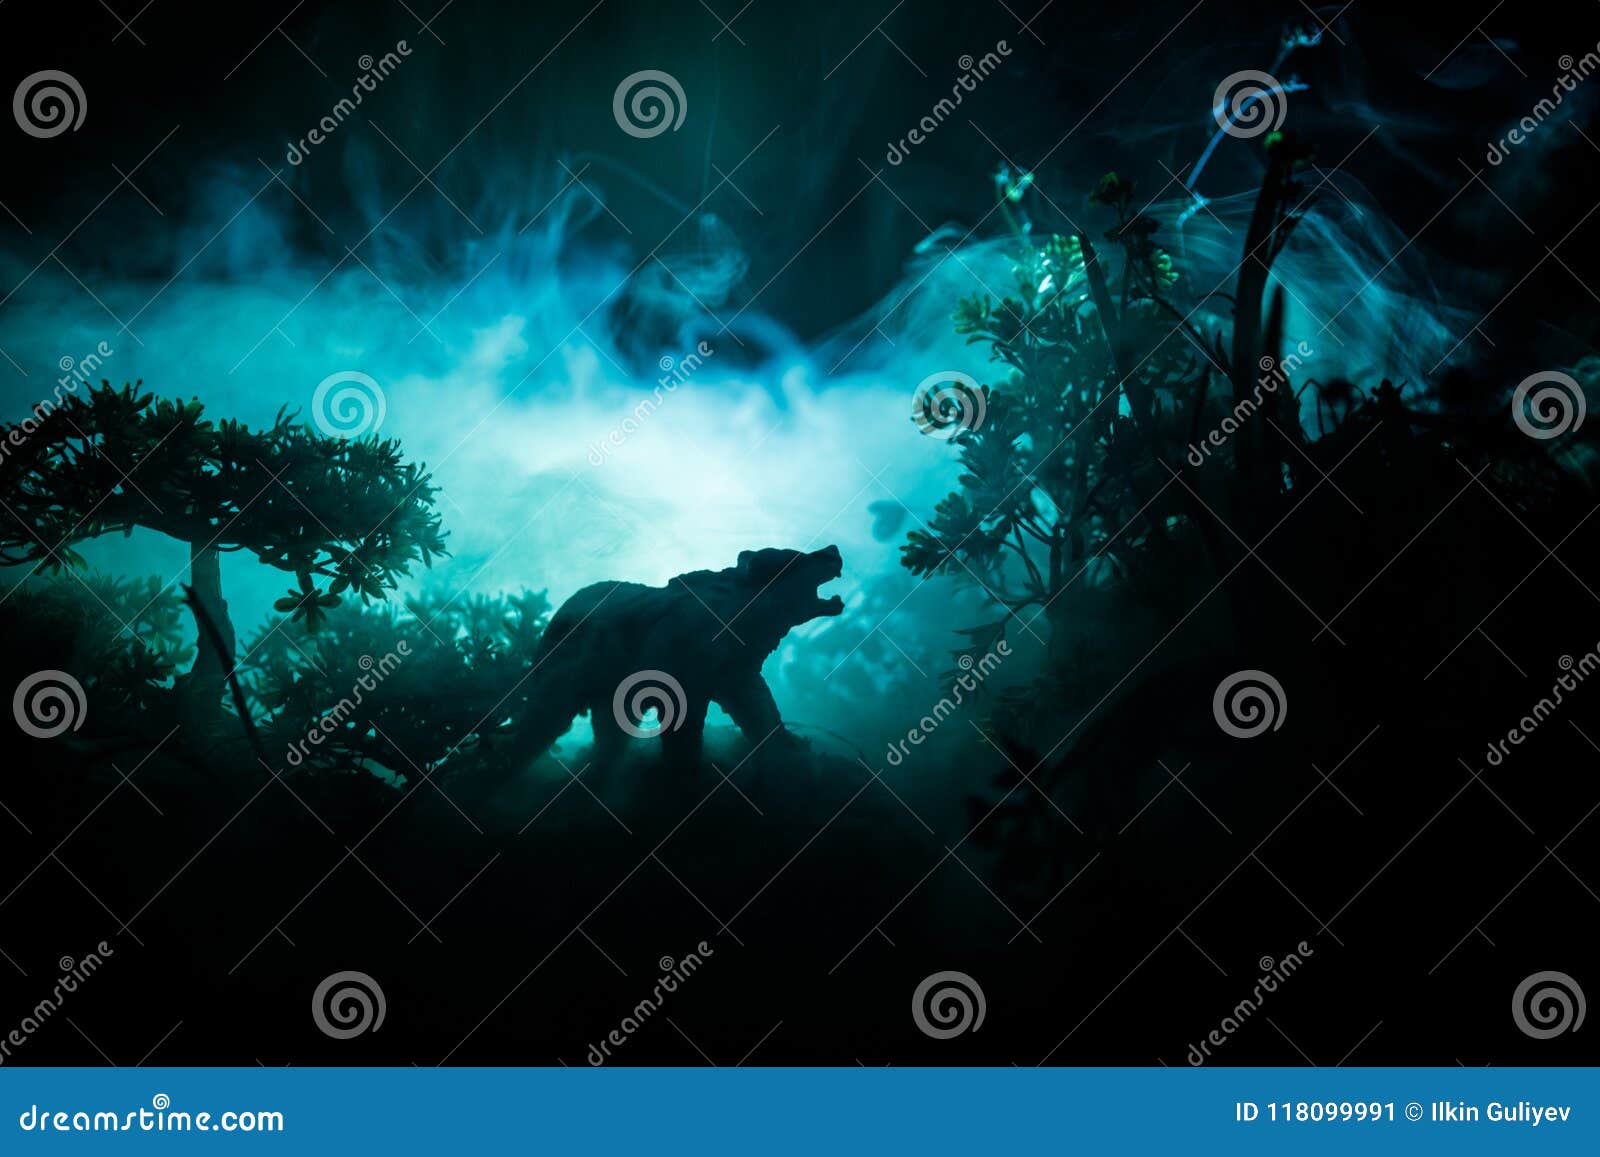 angry bear behind the fire cloudy sky. the silhouette of a bear in foggy forest dark background